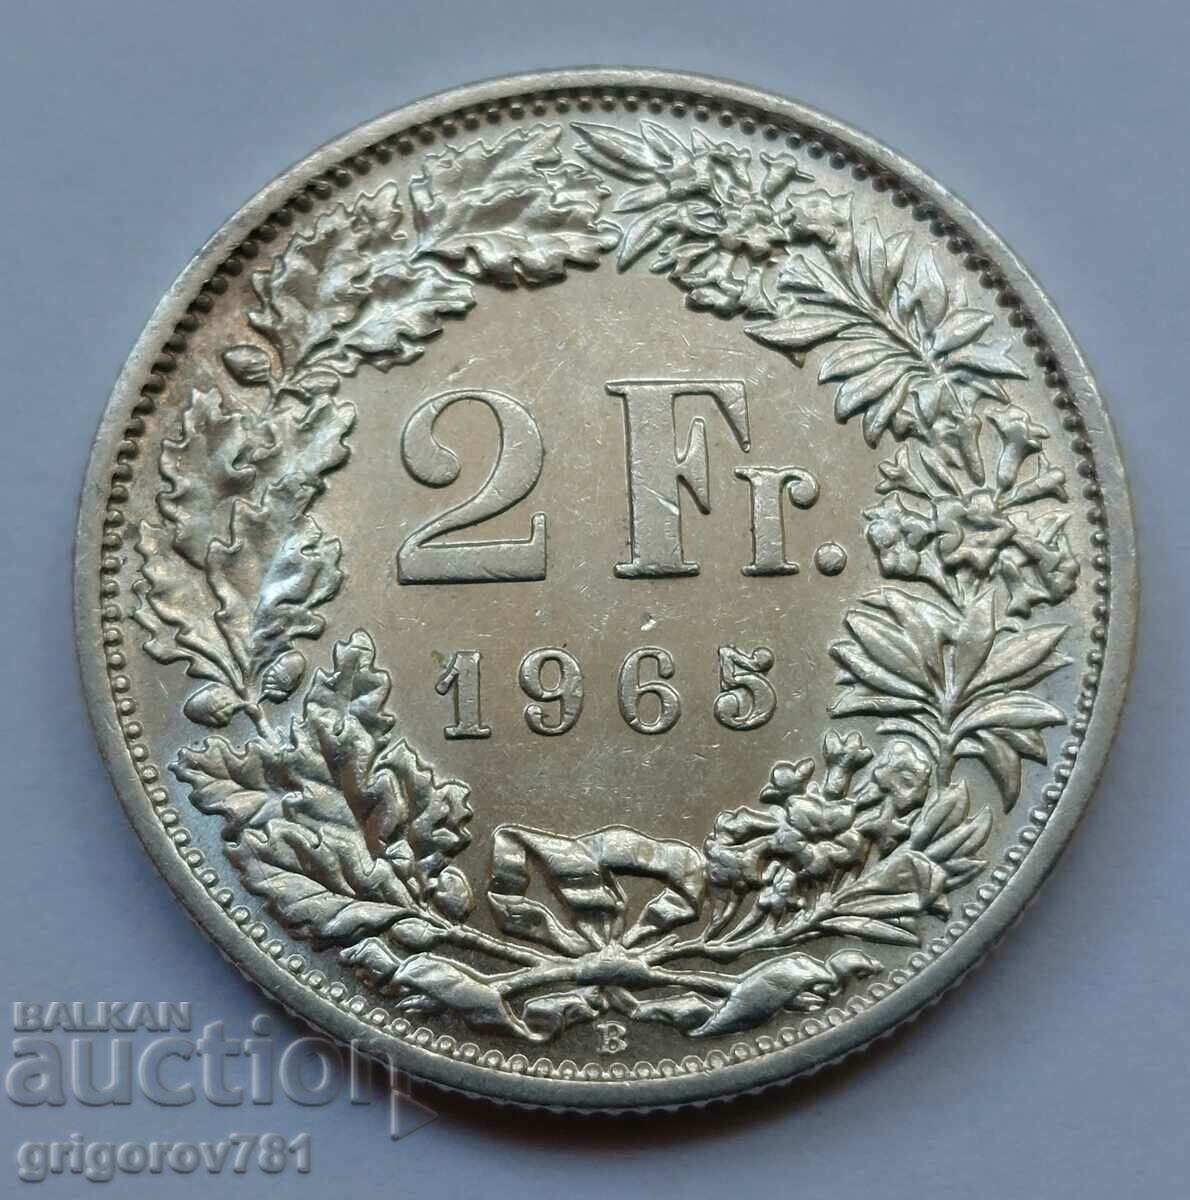 2 Francs Silver Switzerland 1965 B - Silver Coin #24